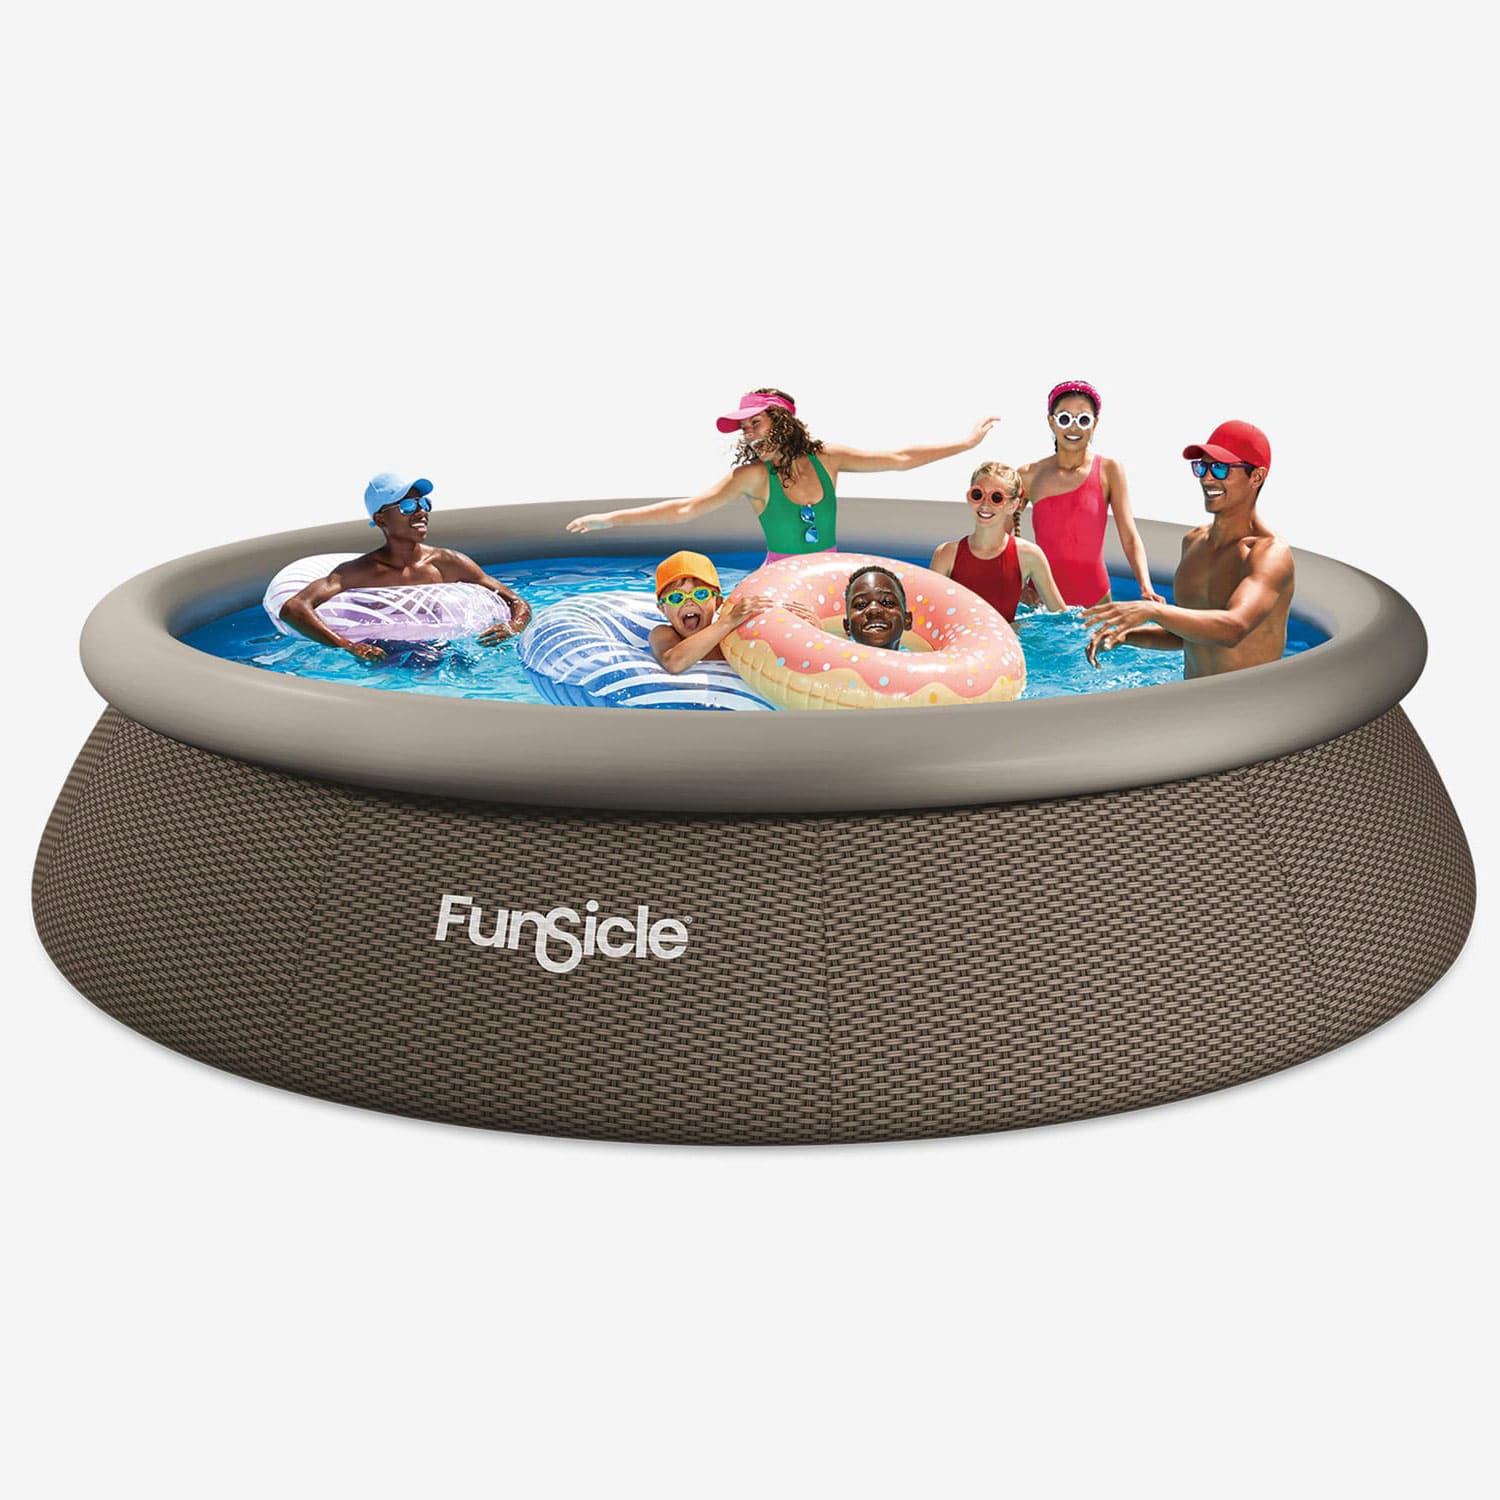 Funsicle 14 ft QuickSet Designer Pool - Dark Double Rattan with people